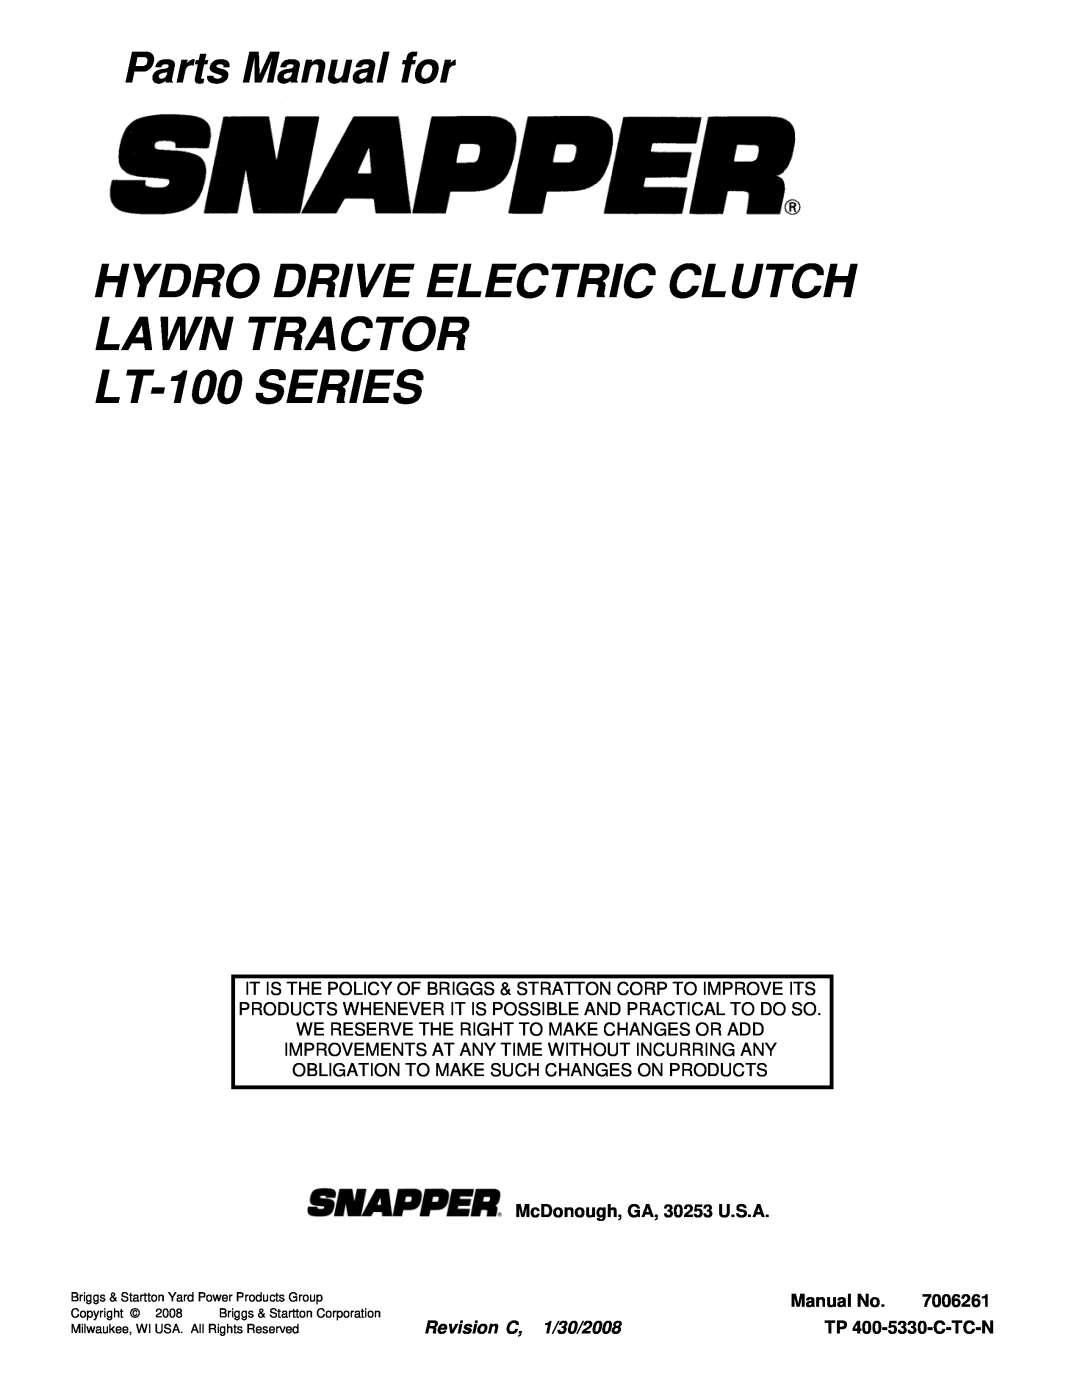 Snapper LT-100 Series Hydro Drive Electric Clutch Lawn Tractor, LT-100SERIES, Parts Manual for, Revision C, 1/30/2008 